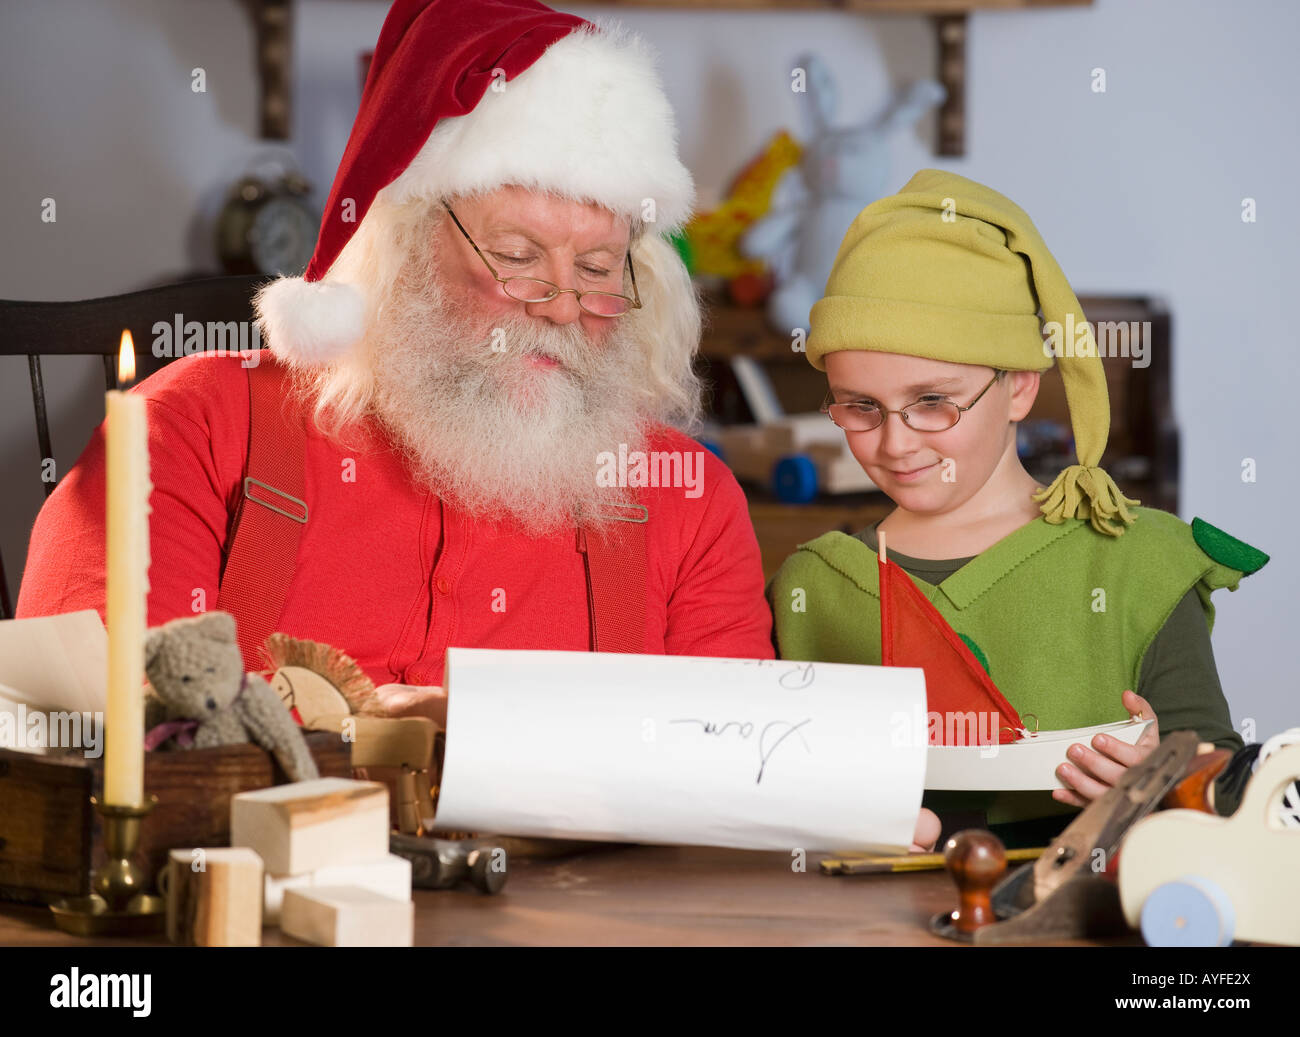 Santa Claus and elf reading list of names Stock Photo